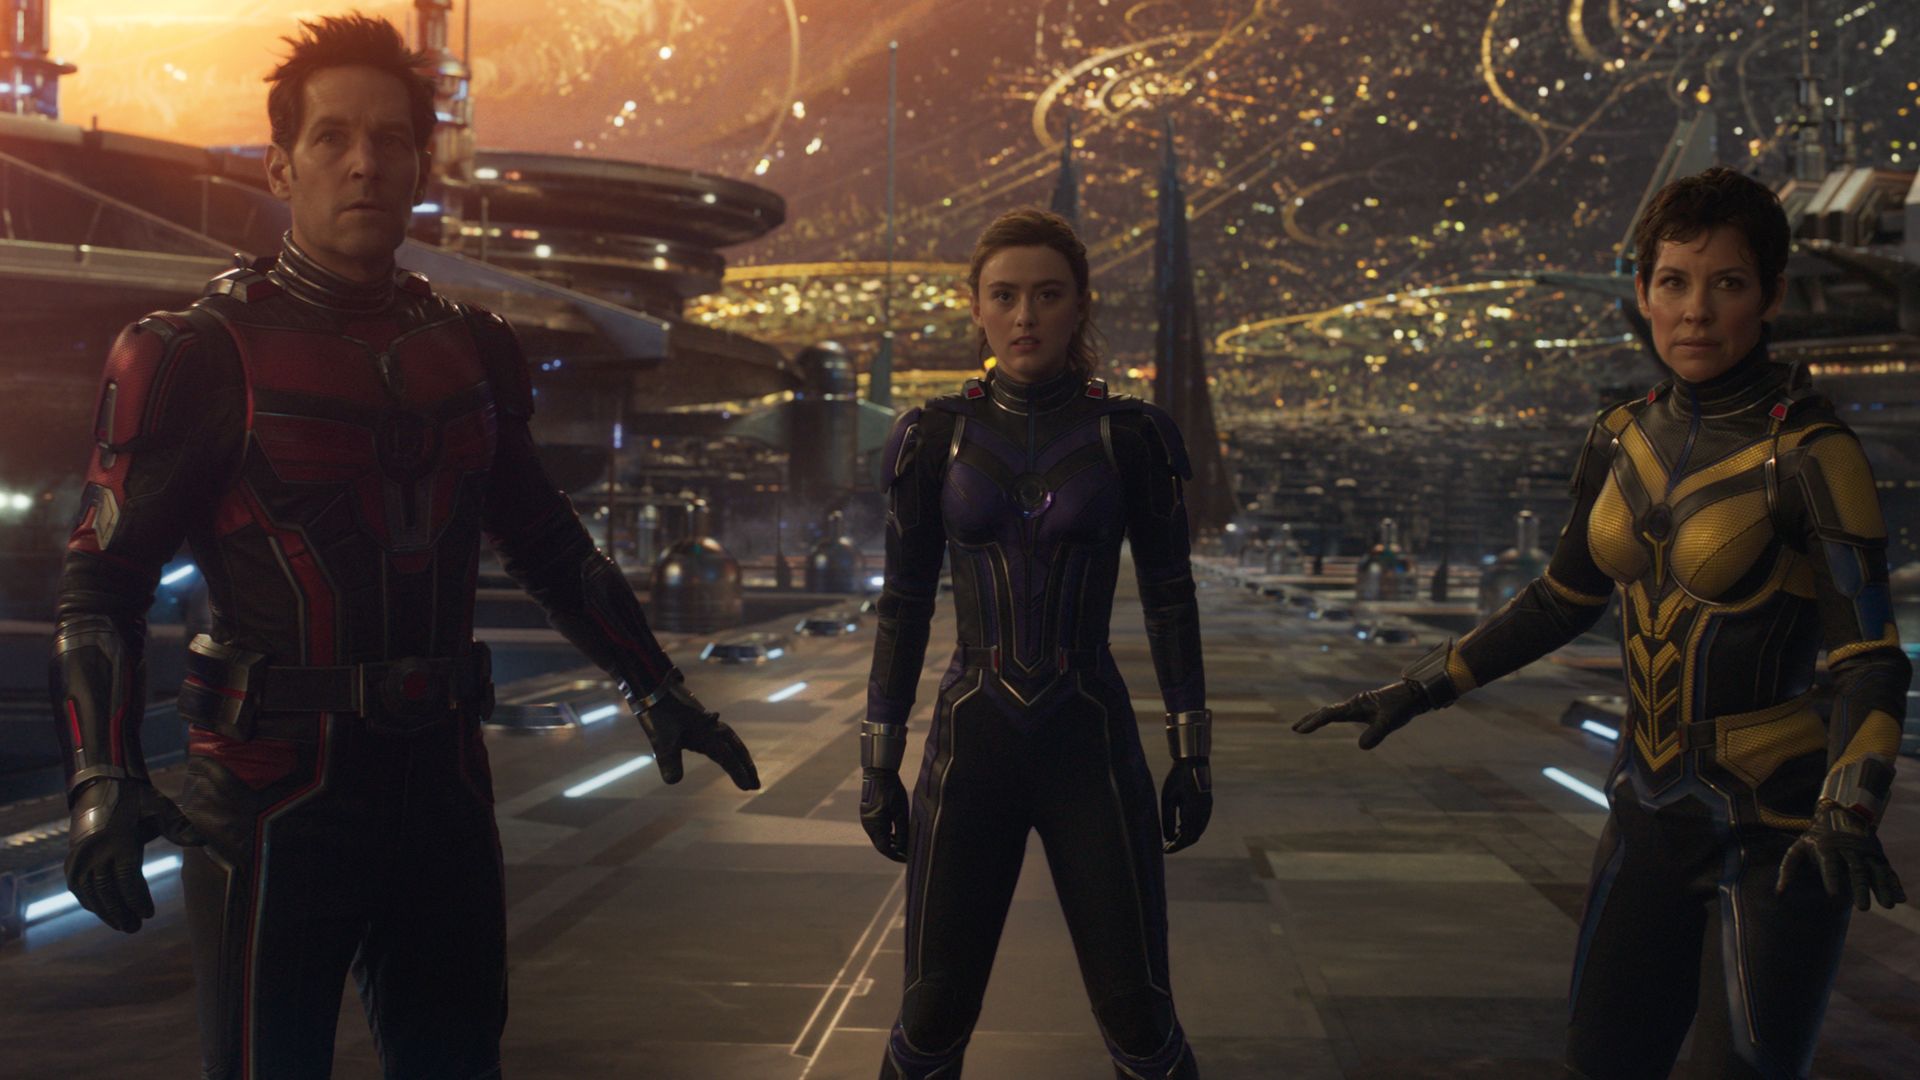 Marvel's Fifth Phase begins mediocre, Antman Quantumania – The